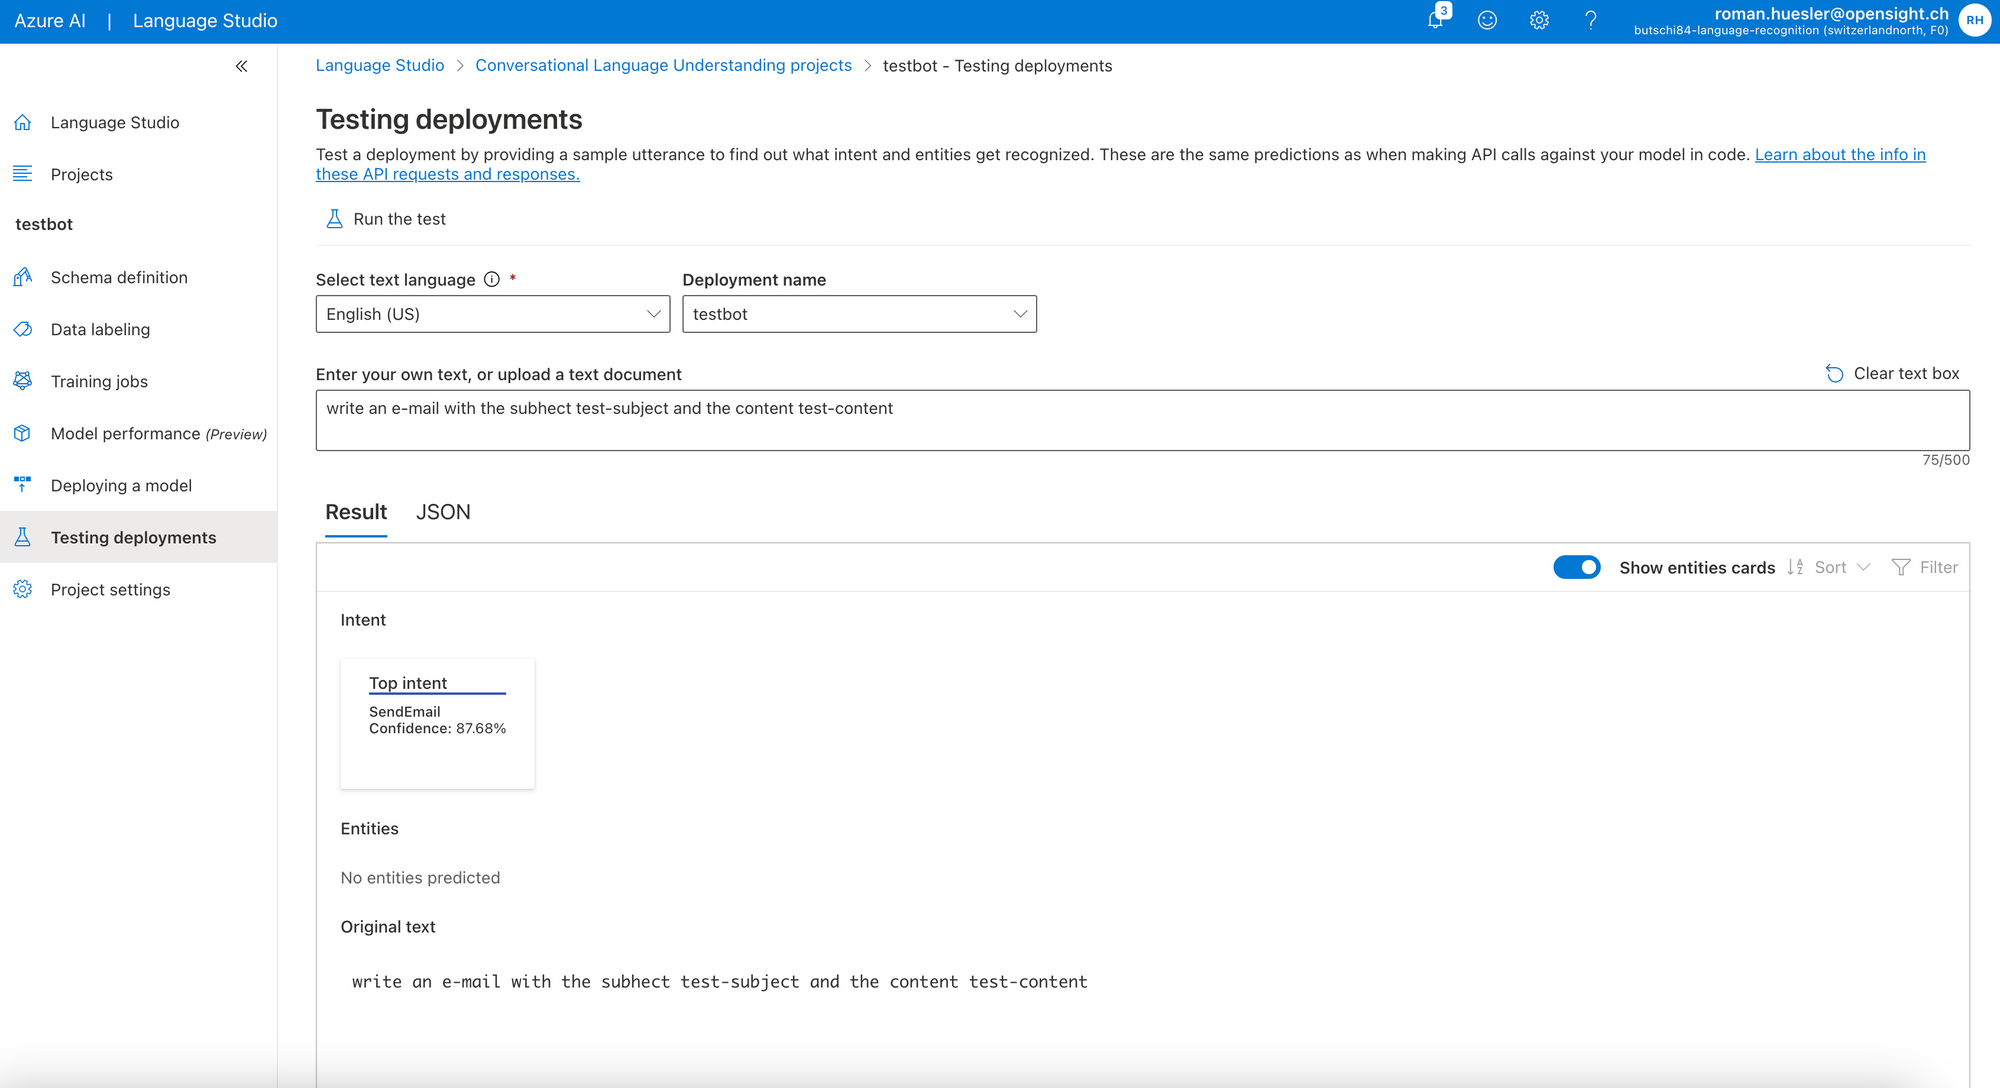 Journey to an intelligent Azure Chat Bot - Part 5